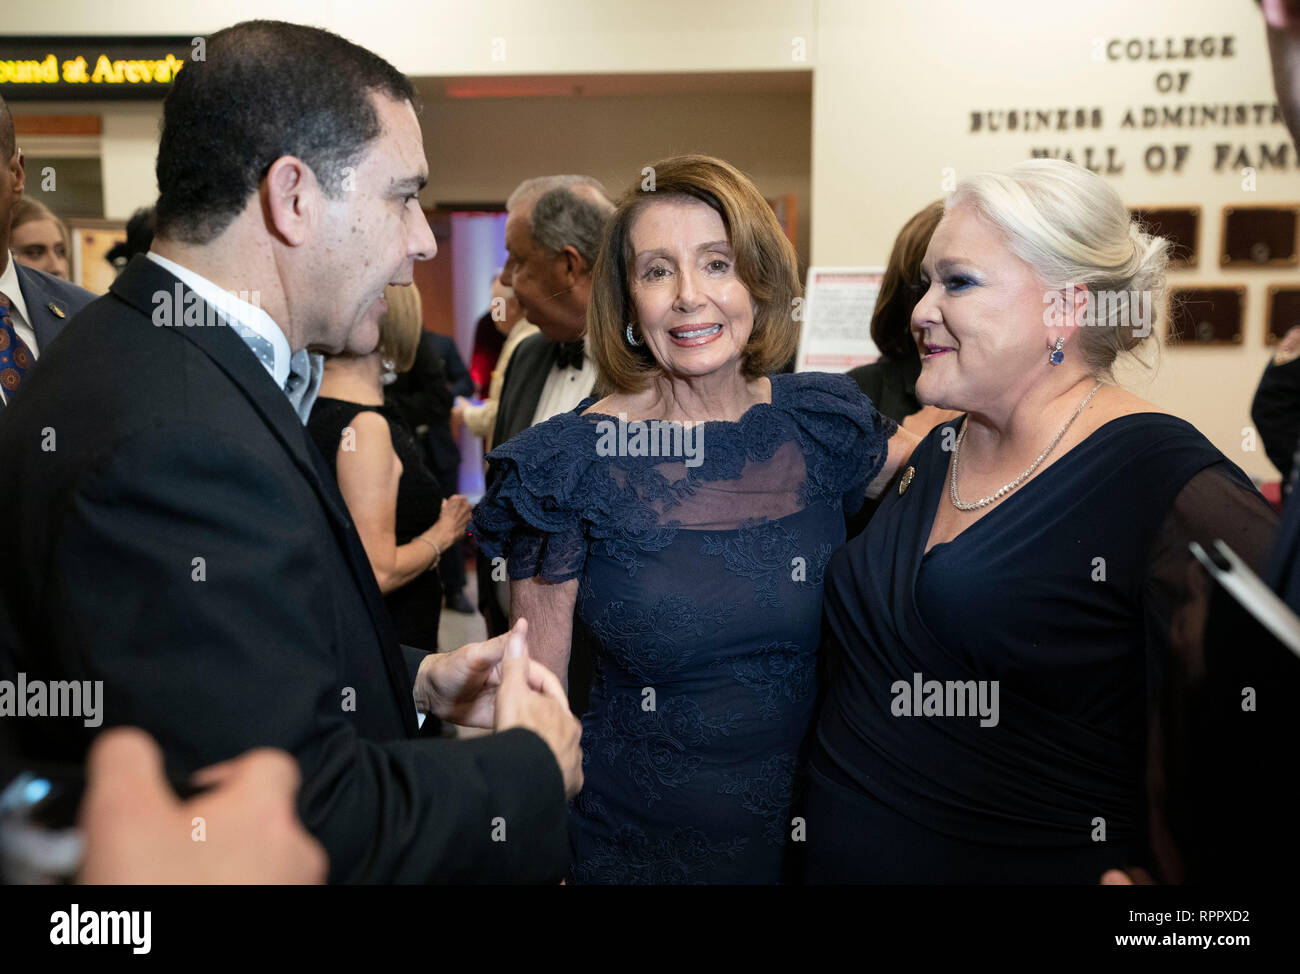 Speaker of the United States House of Representatives Nancy Pelosi poses at a cocktail party as an honored guest of the George Washington's Birthday celebration in the border city of Laredo, Texas. At left is U.S, Congressman Henry Cuellar, D-Laredo. Stock Photo